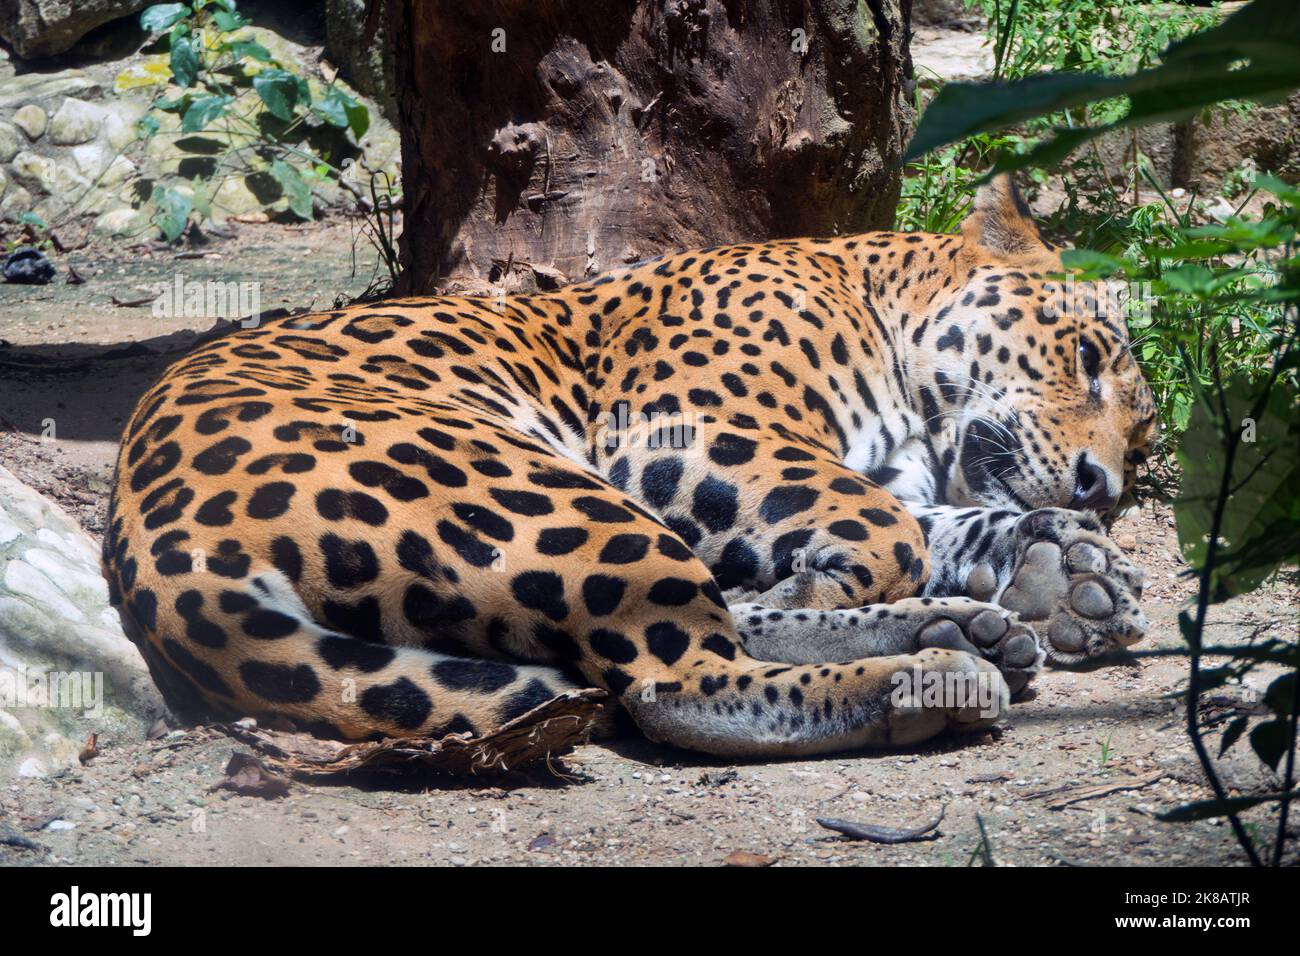 Large male jaguar in zoo cage in Chiapas, Mexico. Big cat (Panthera onca) sleeping in enclosure Stock Photo